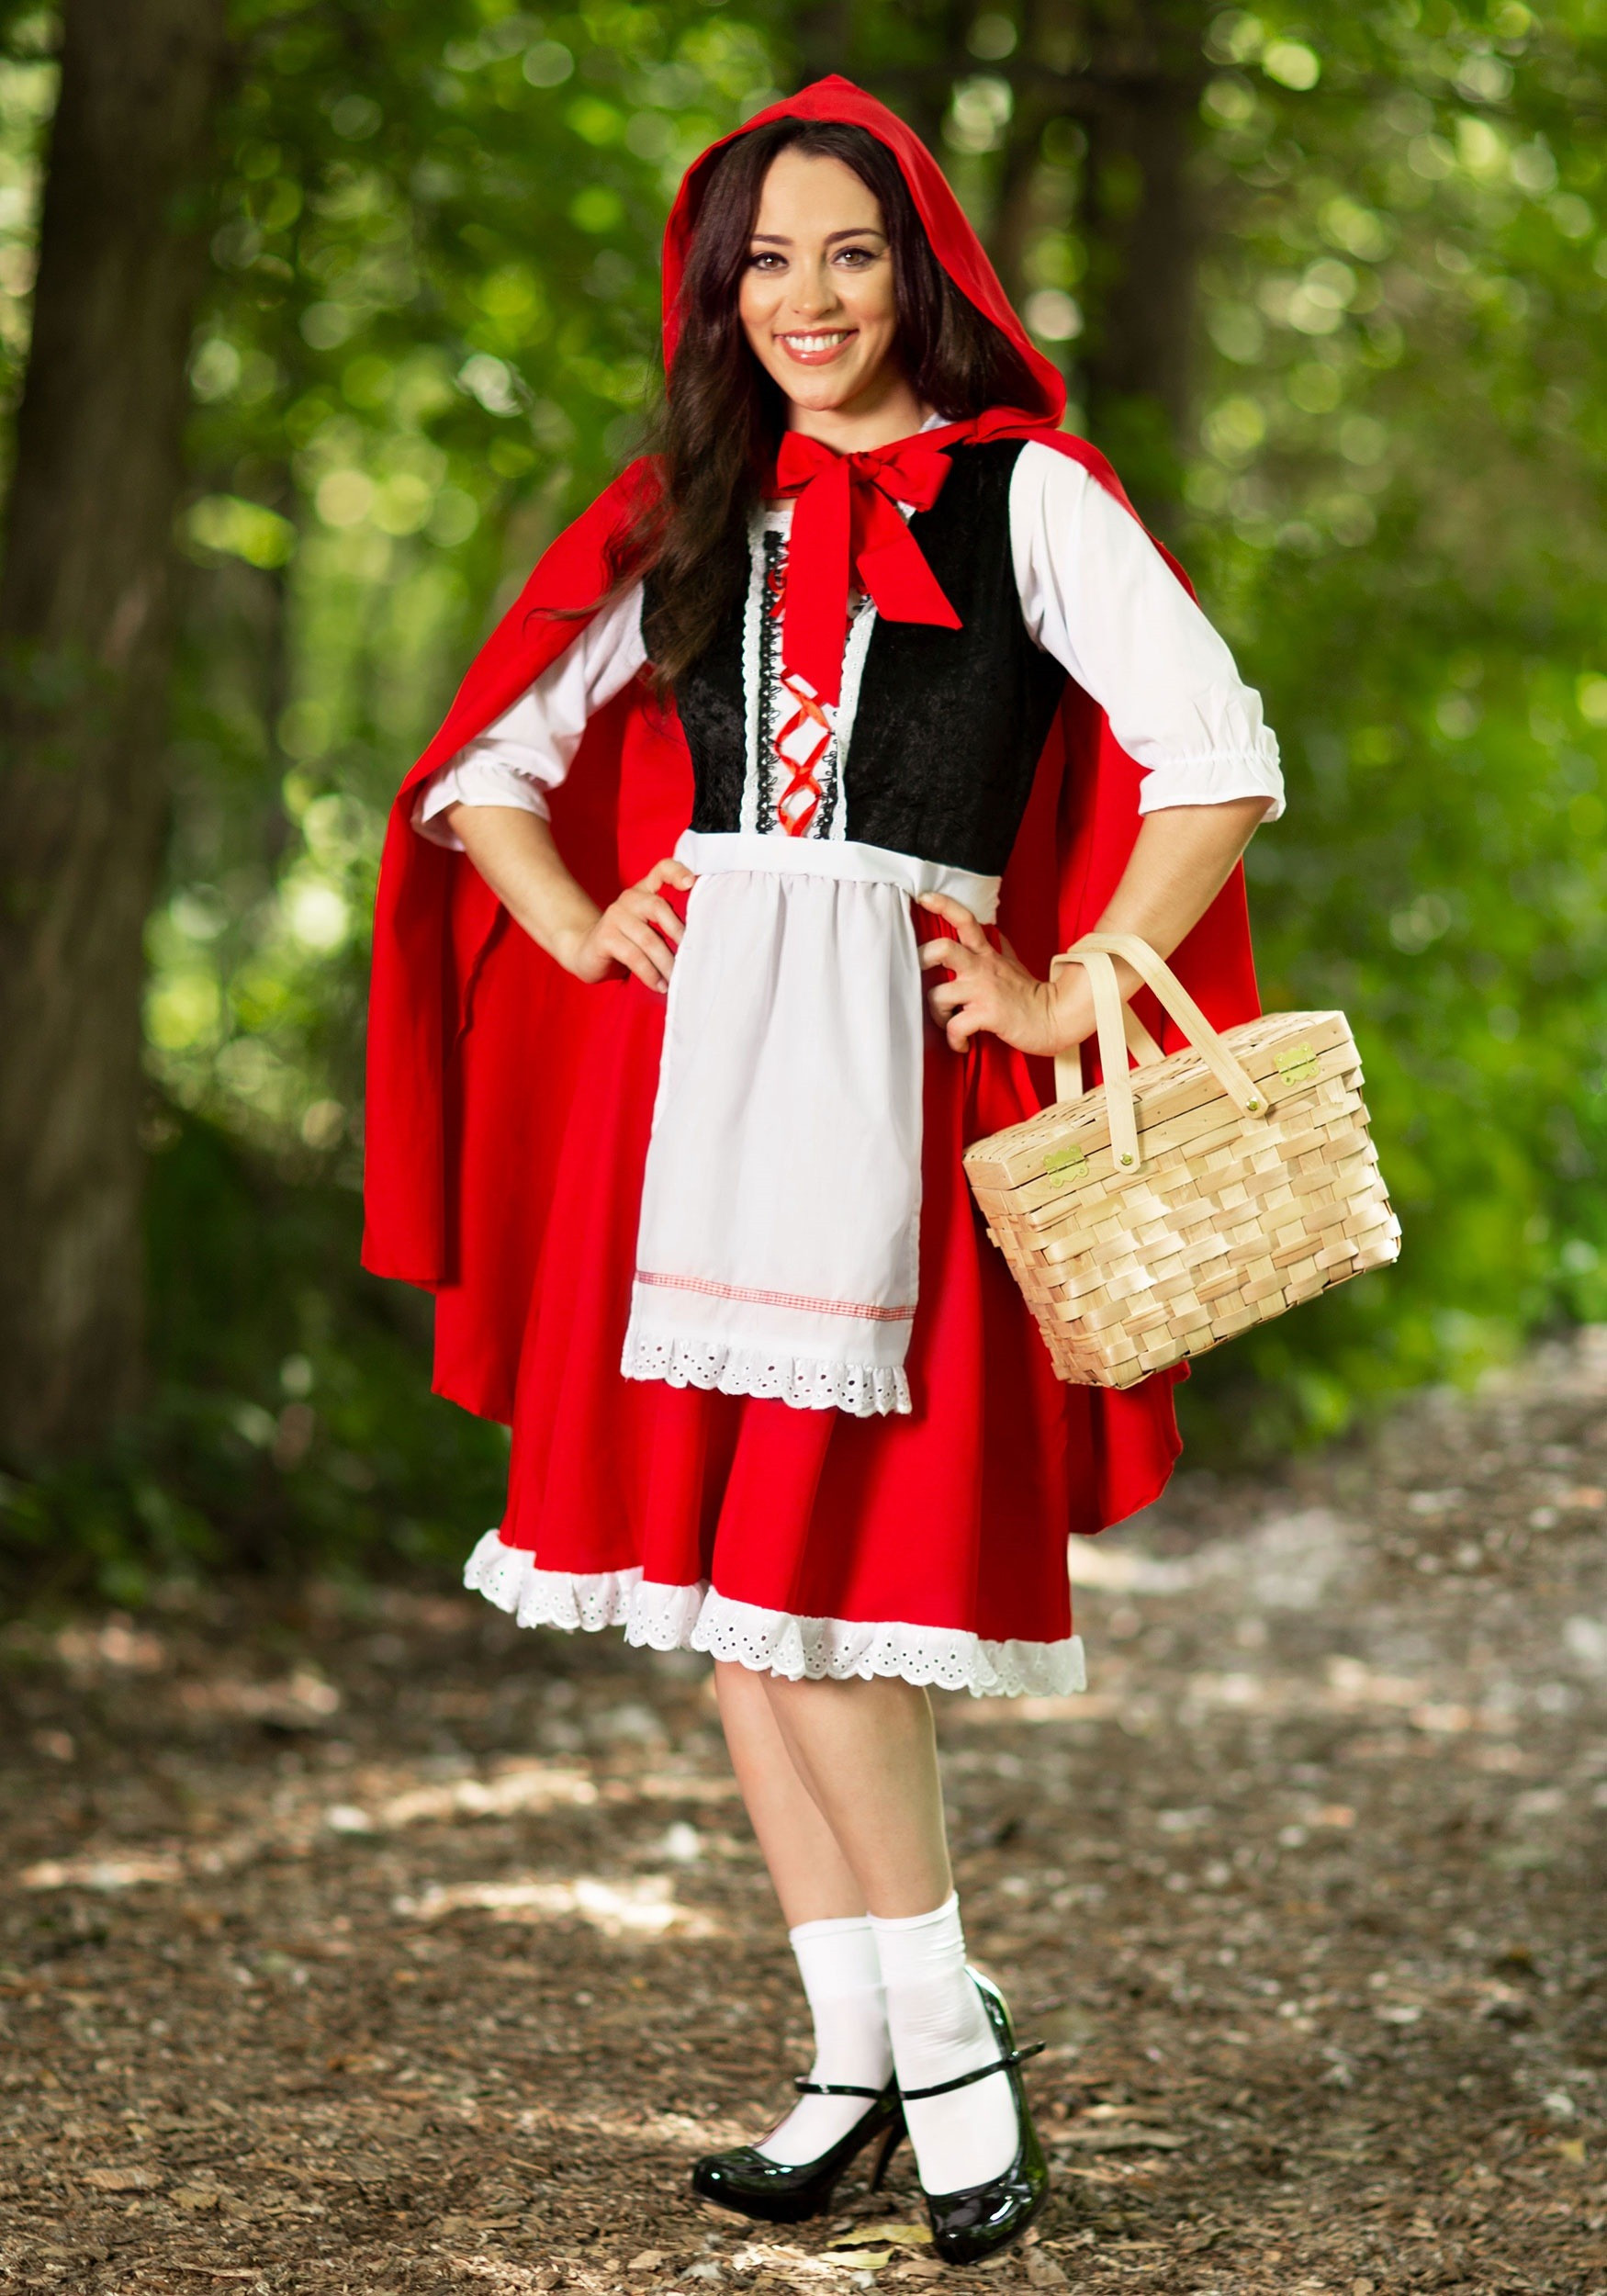 Red Riding Hood DIY Costume
 Little Red Riding Hood Costume for Adults